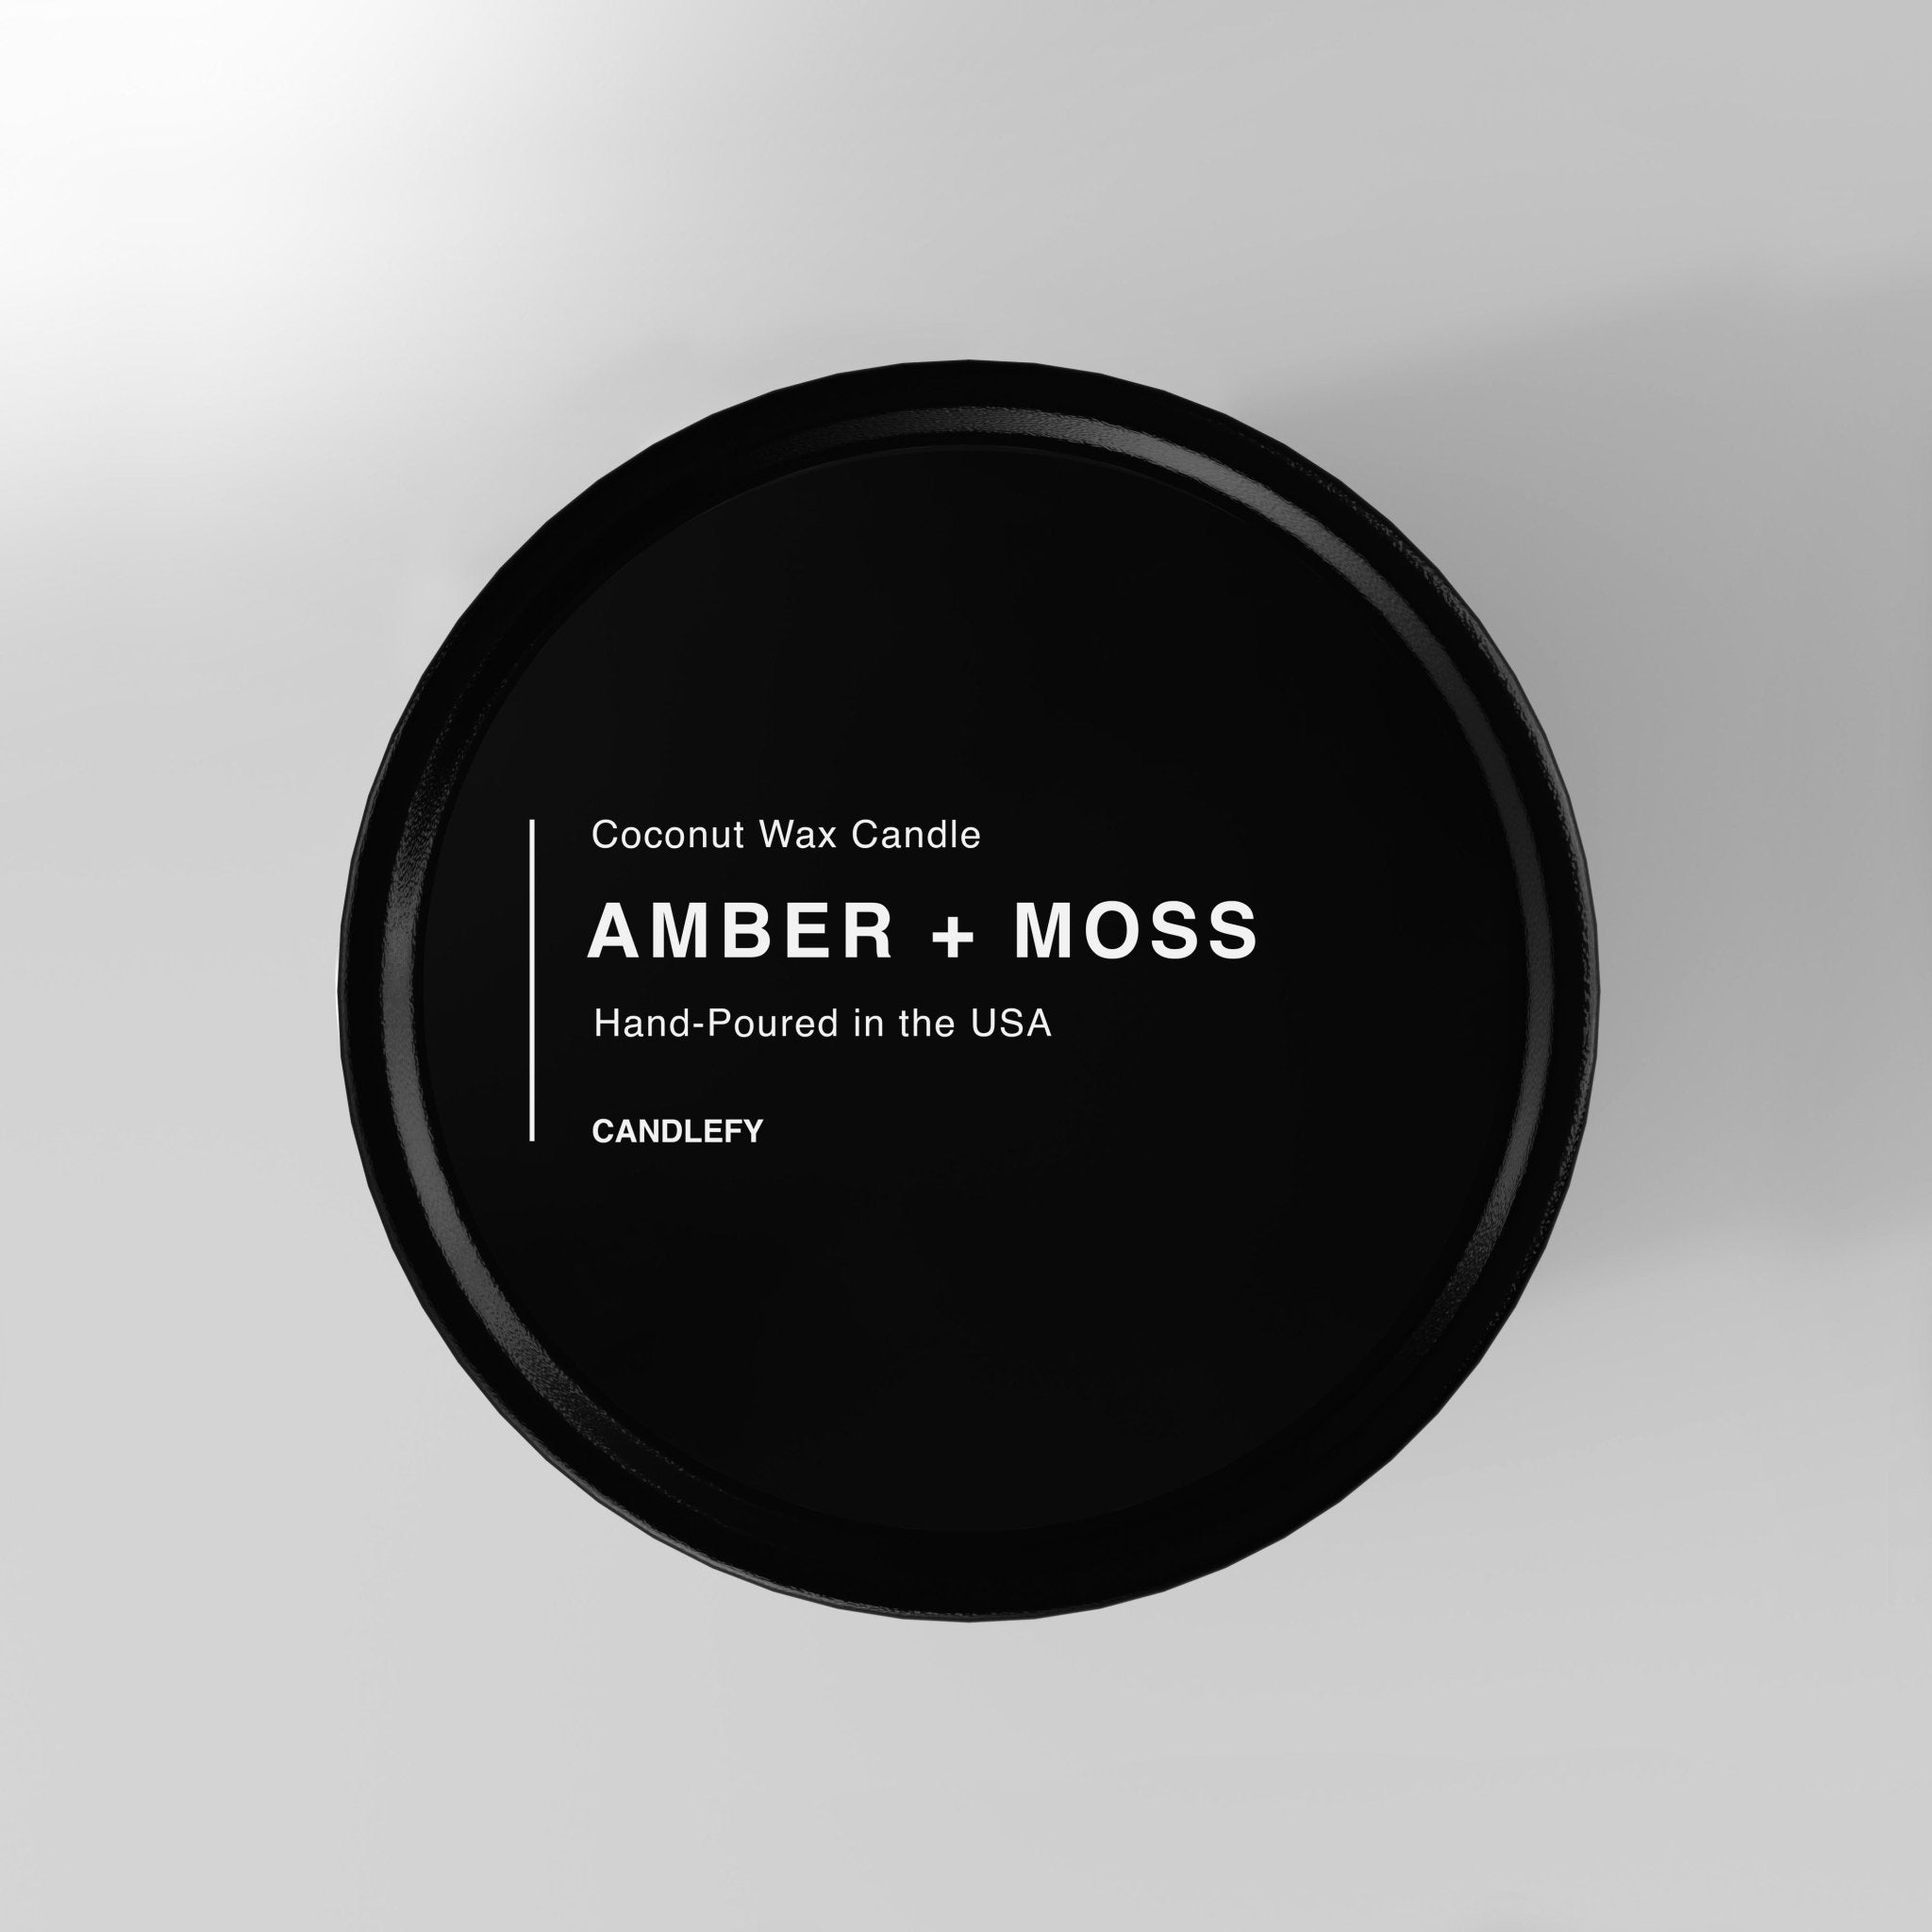 Amber + Moss Natural Wax Scented Candle in Black Travel Tin - Candlefy